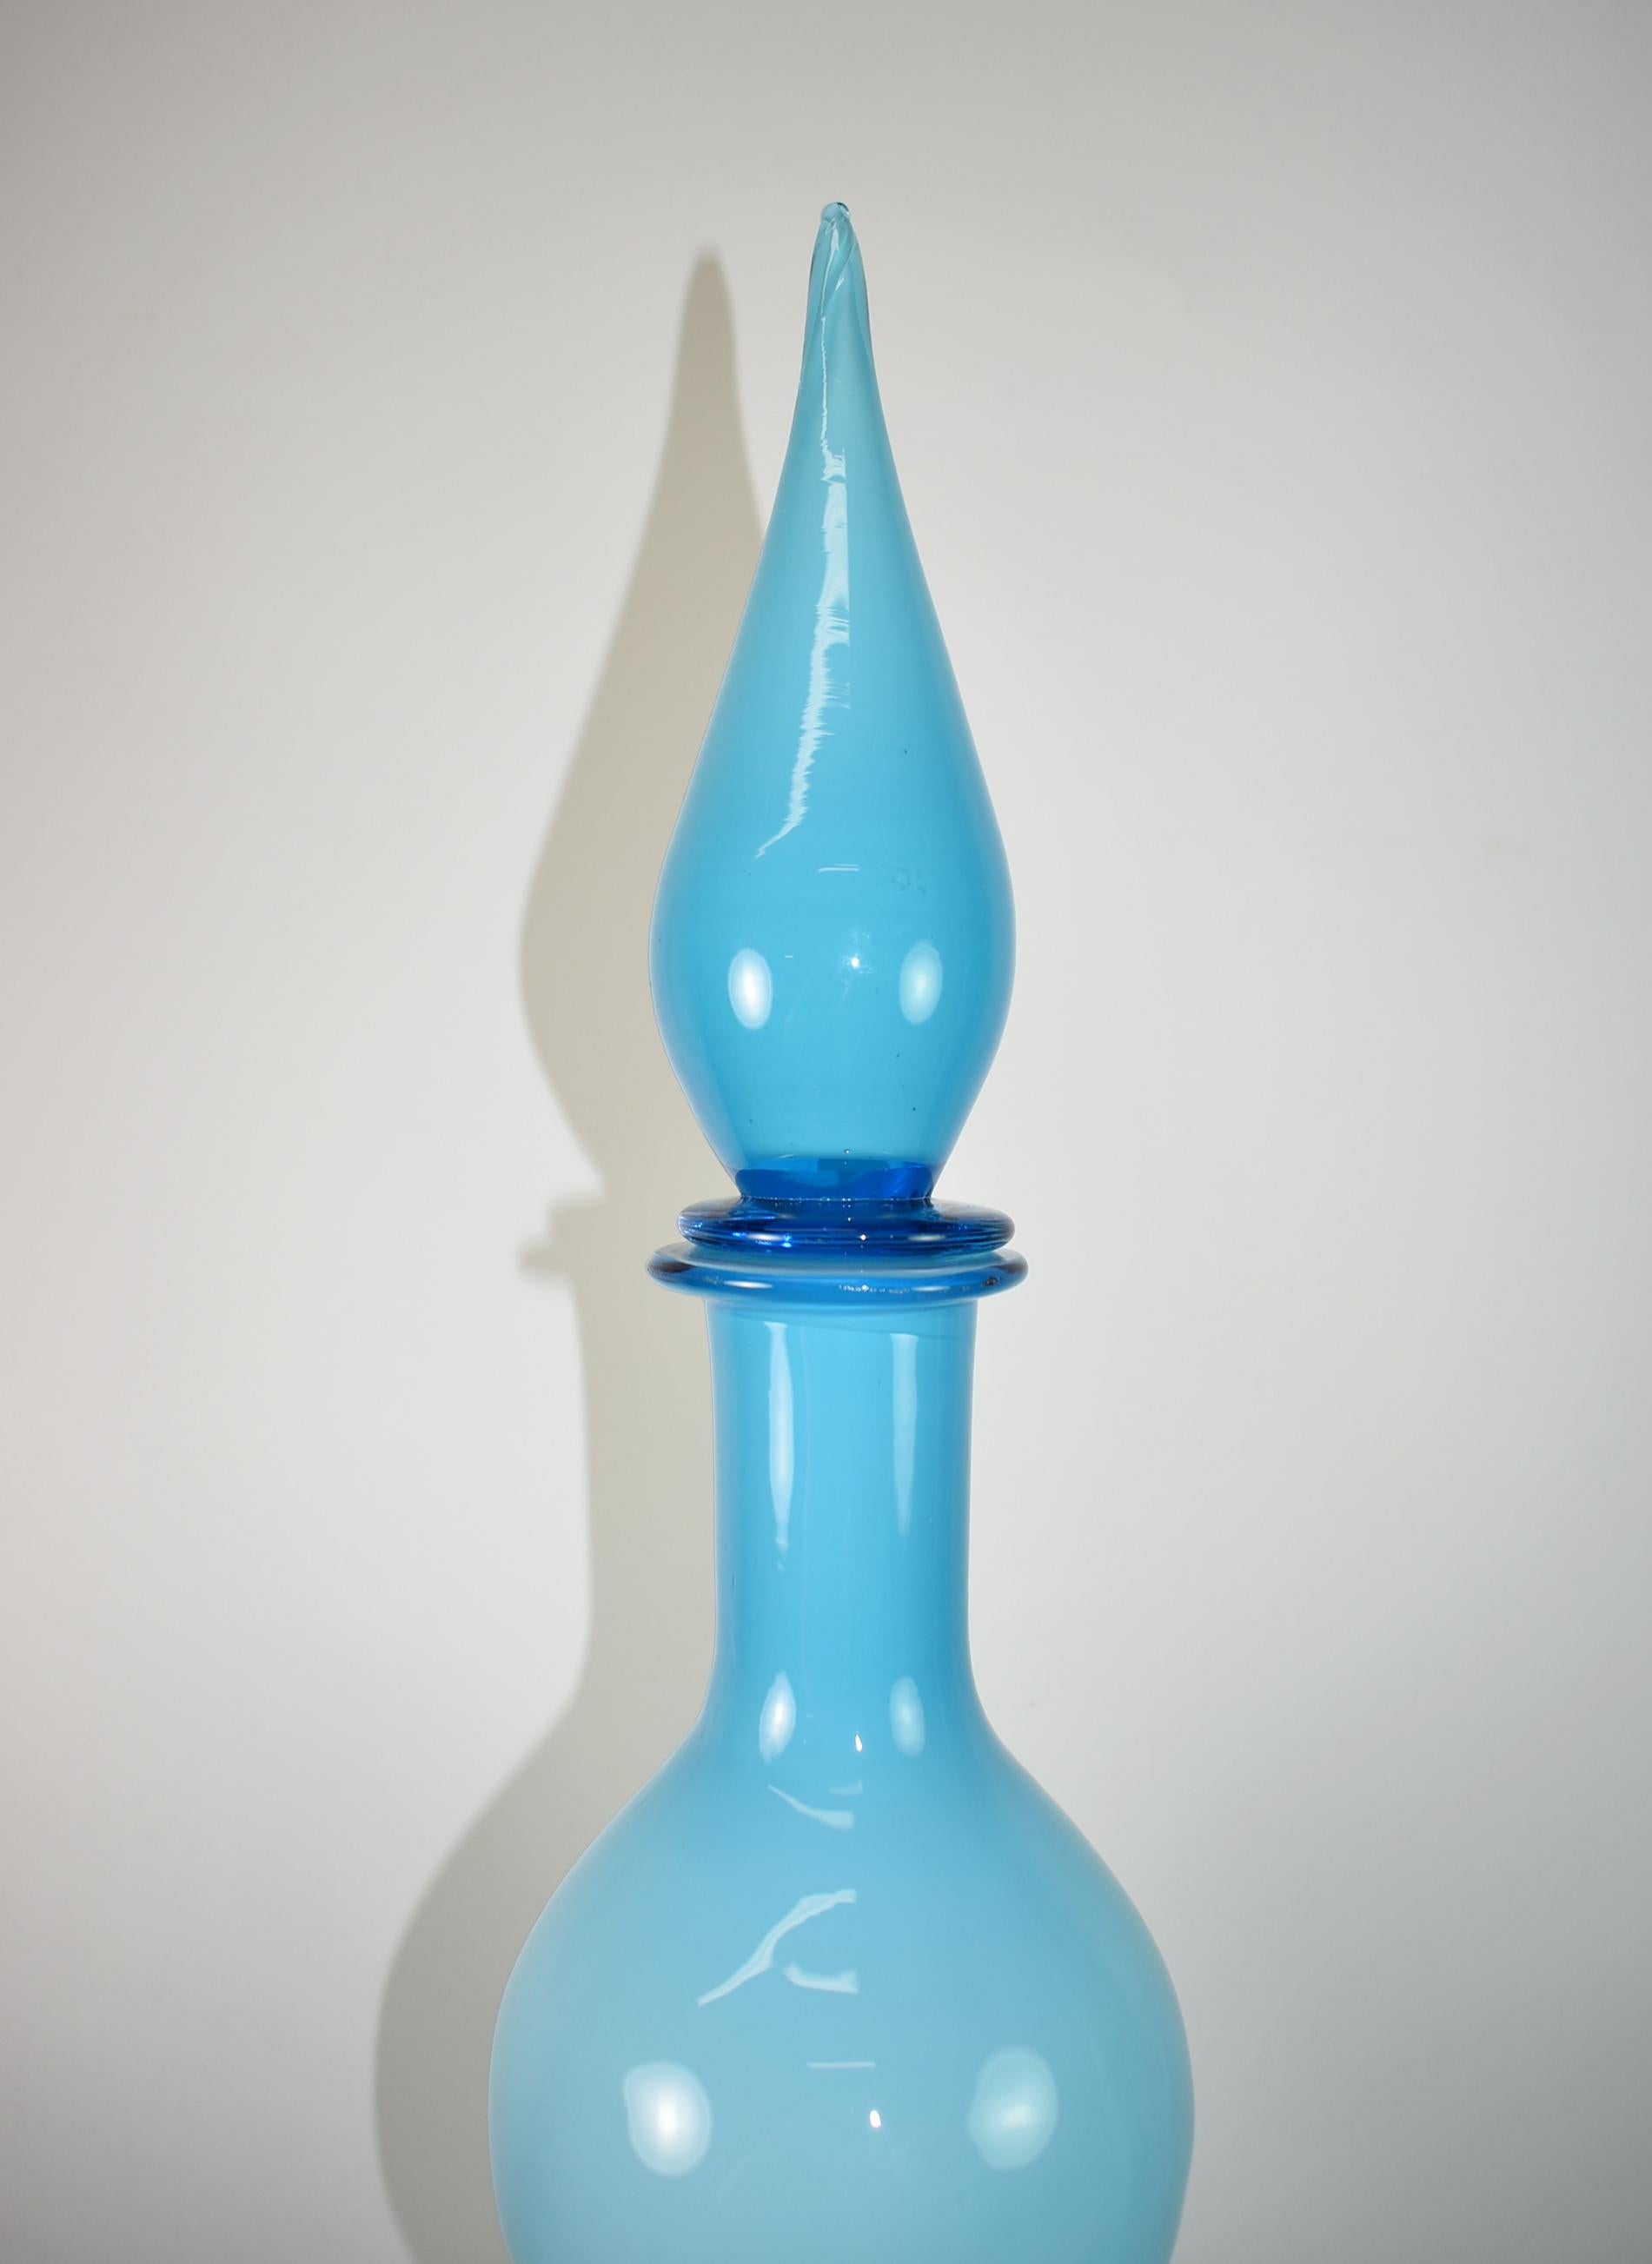 Vintage aqua blue hand blown glass, Empoli Italian decanter, three waves, Murano, Mid-Century circa 1950-60s. White interior with blue cased glass with a teardrop stopper. Very good condition with light scratch on edge of bottom face. Dimensions: